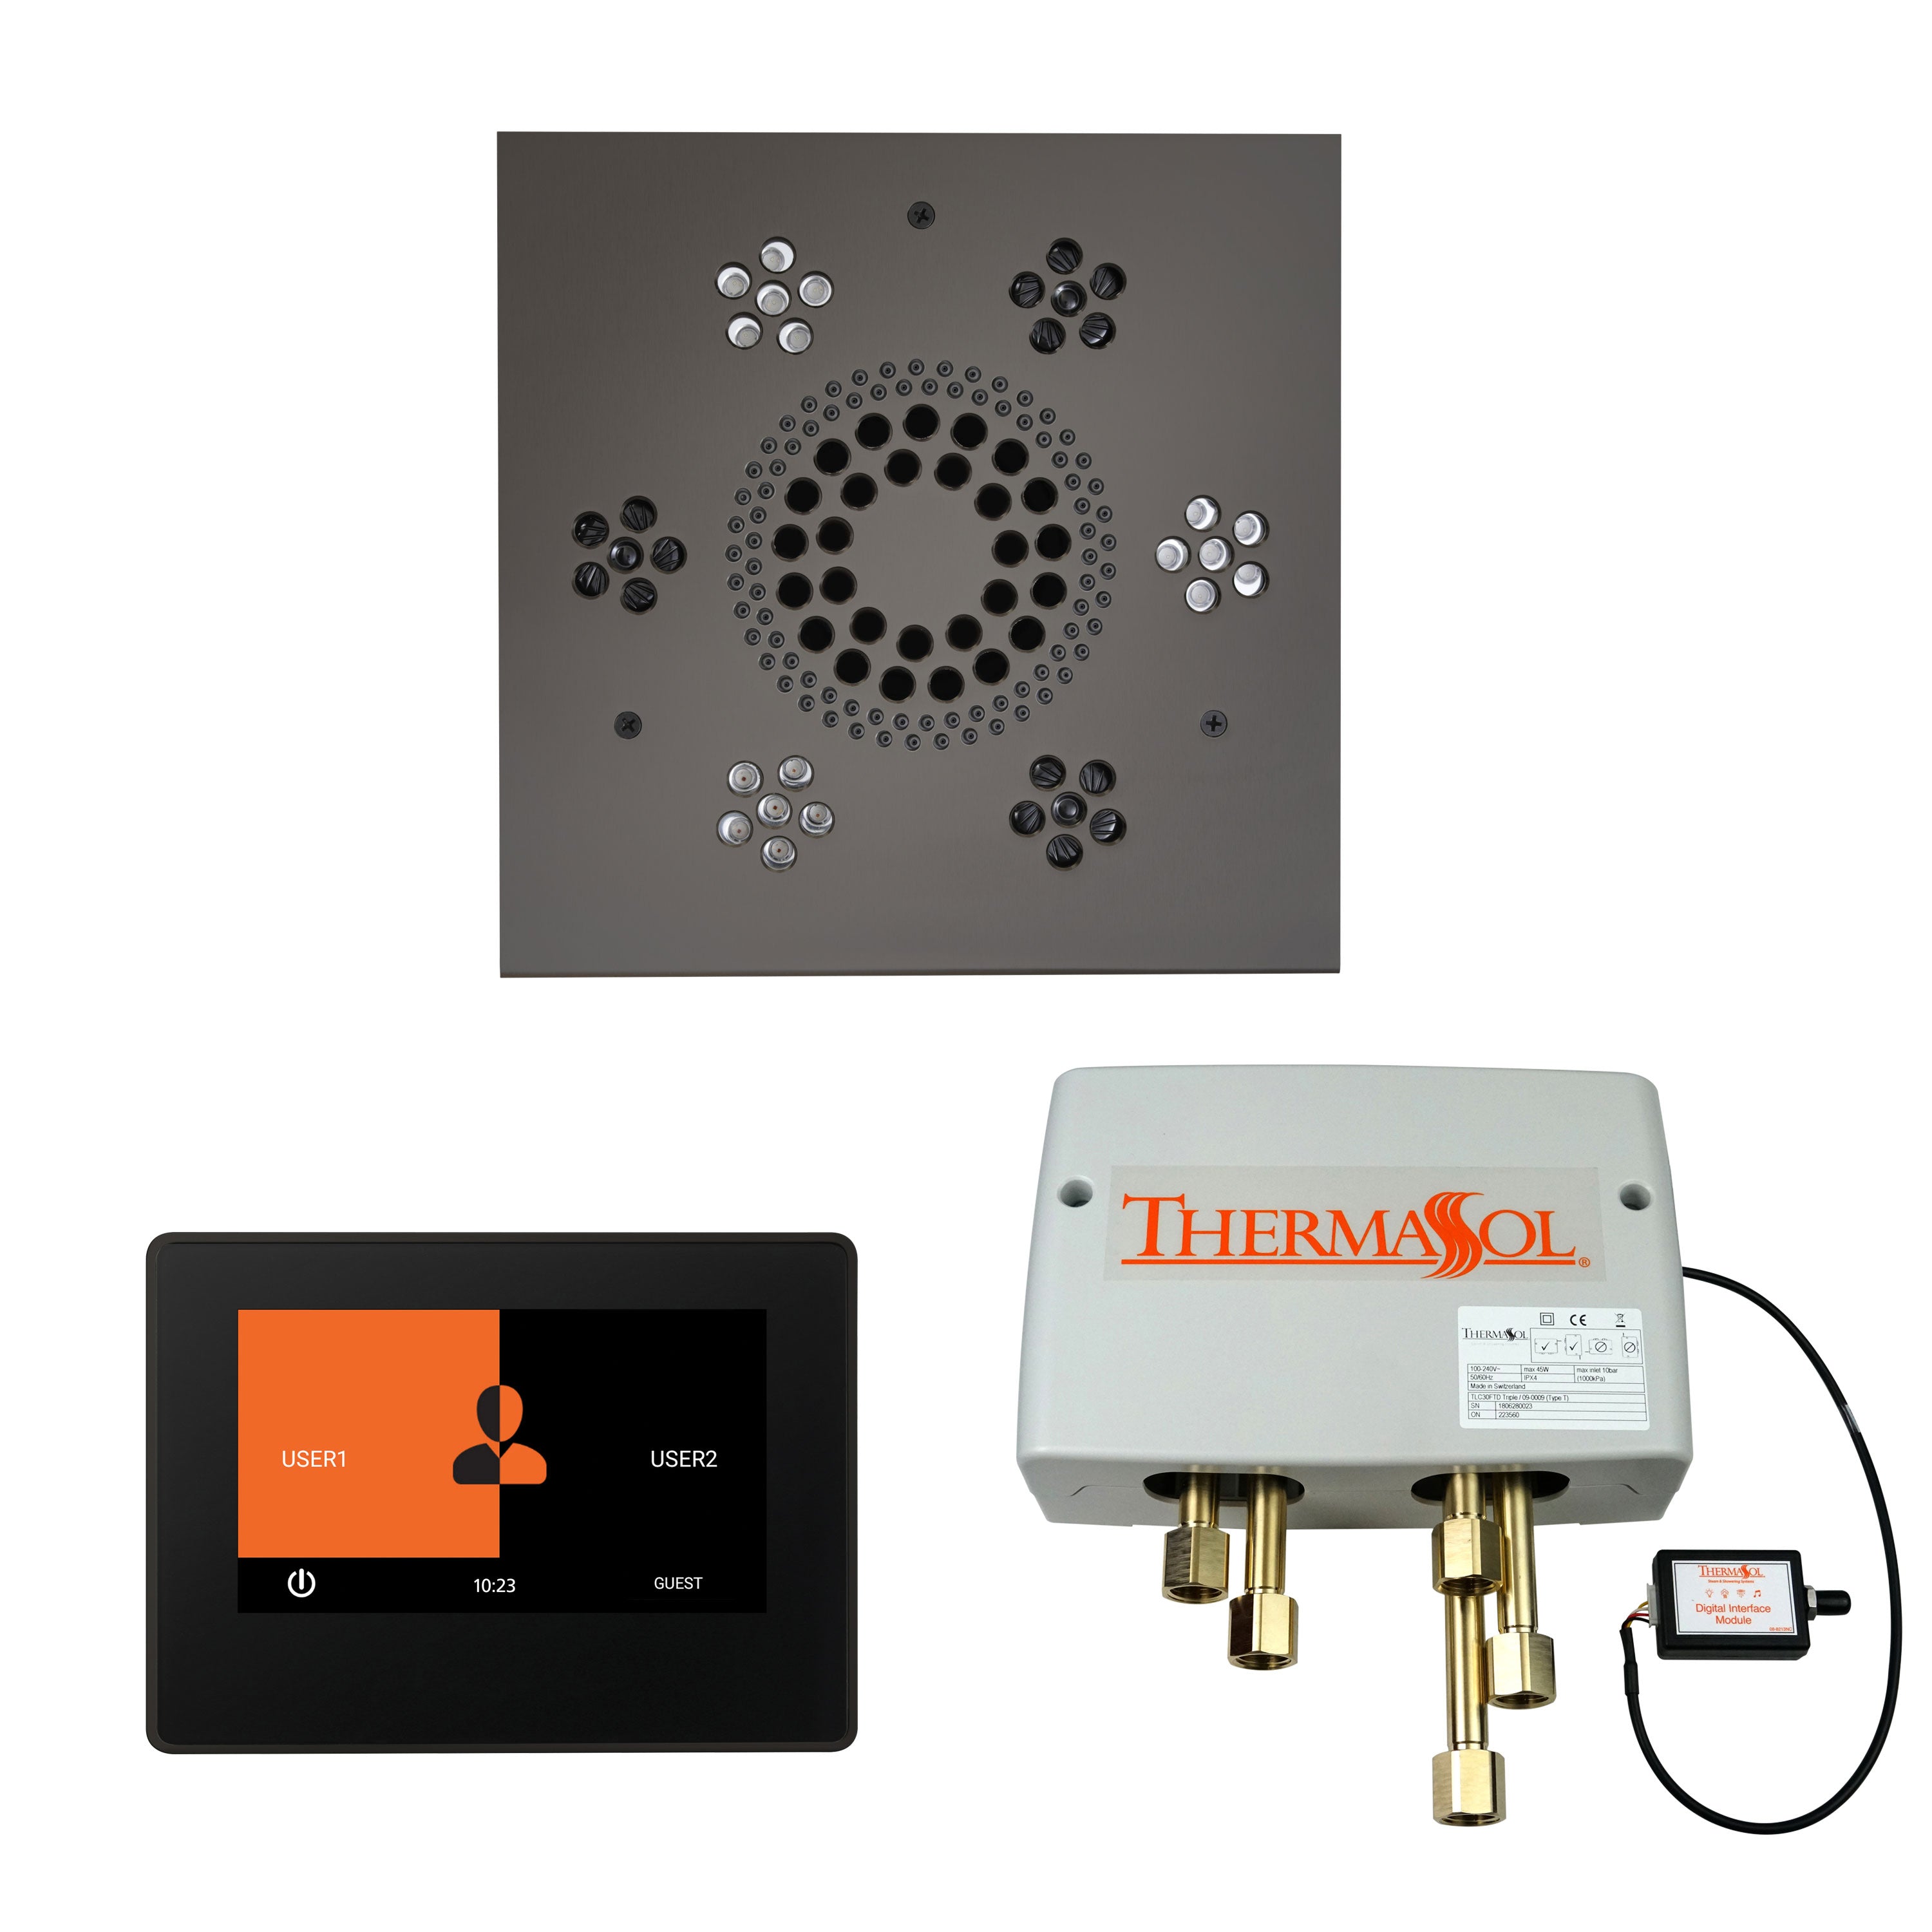 ThermaSol Shower Kit - The Wellness Shower Package with 7" ThermaTouch